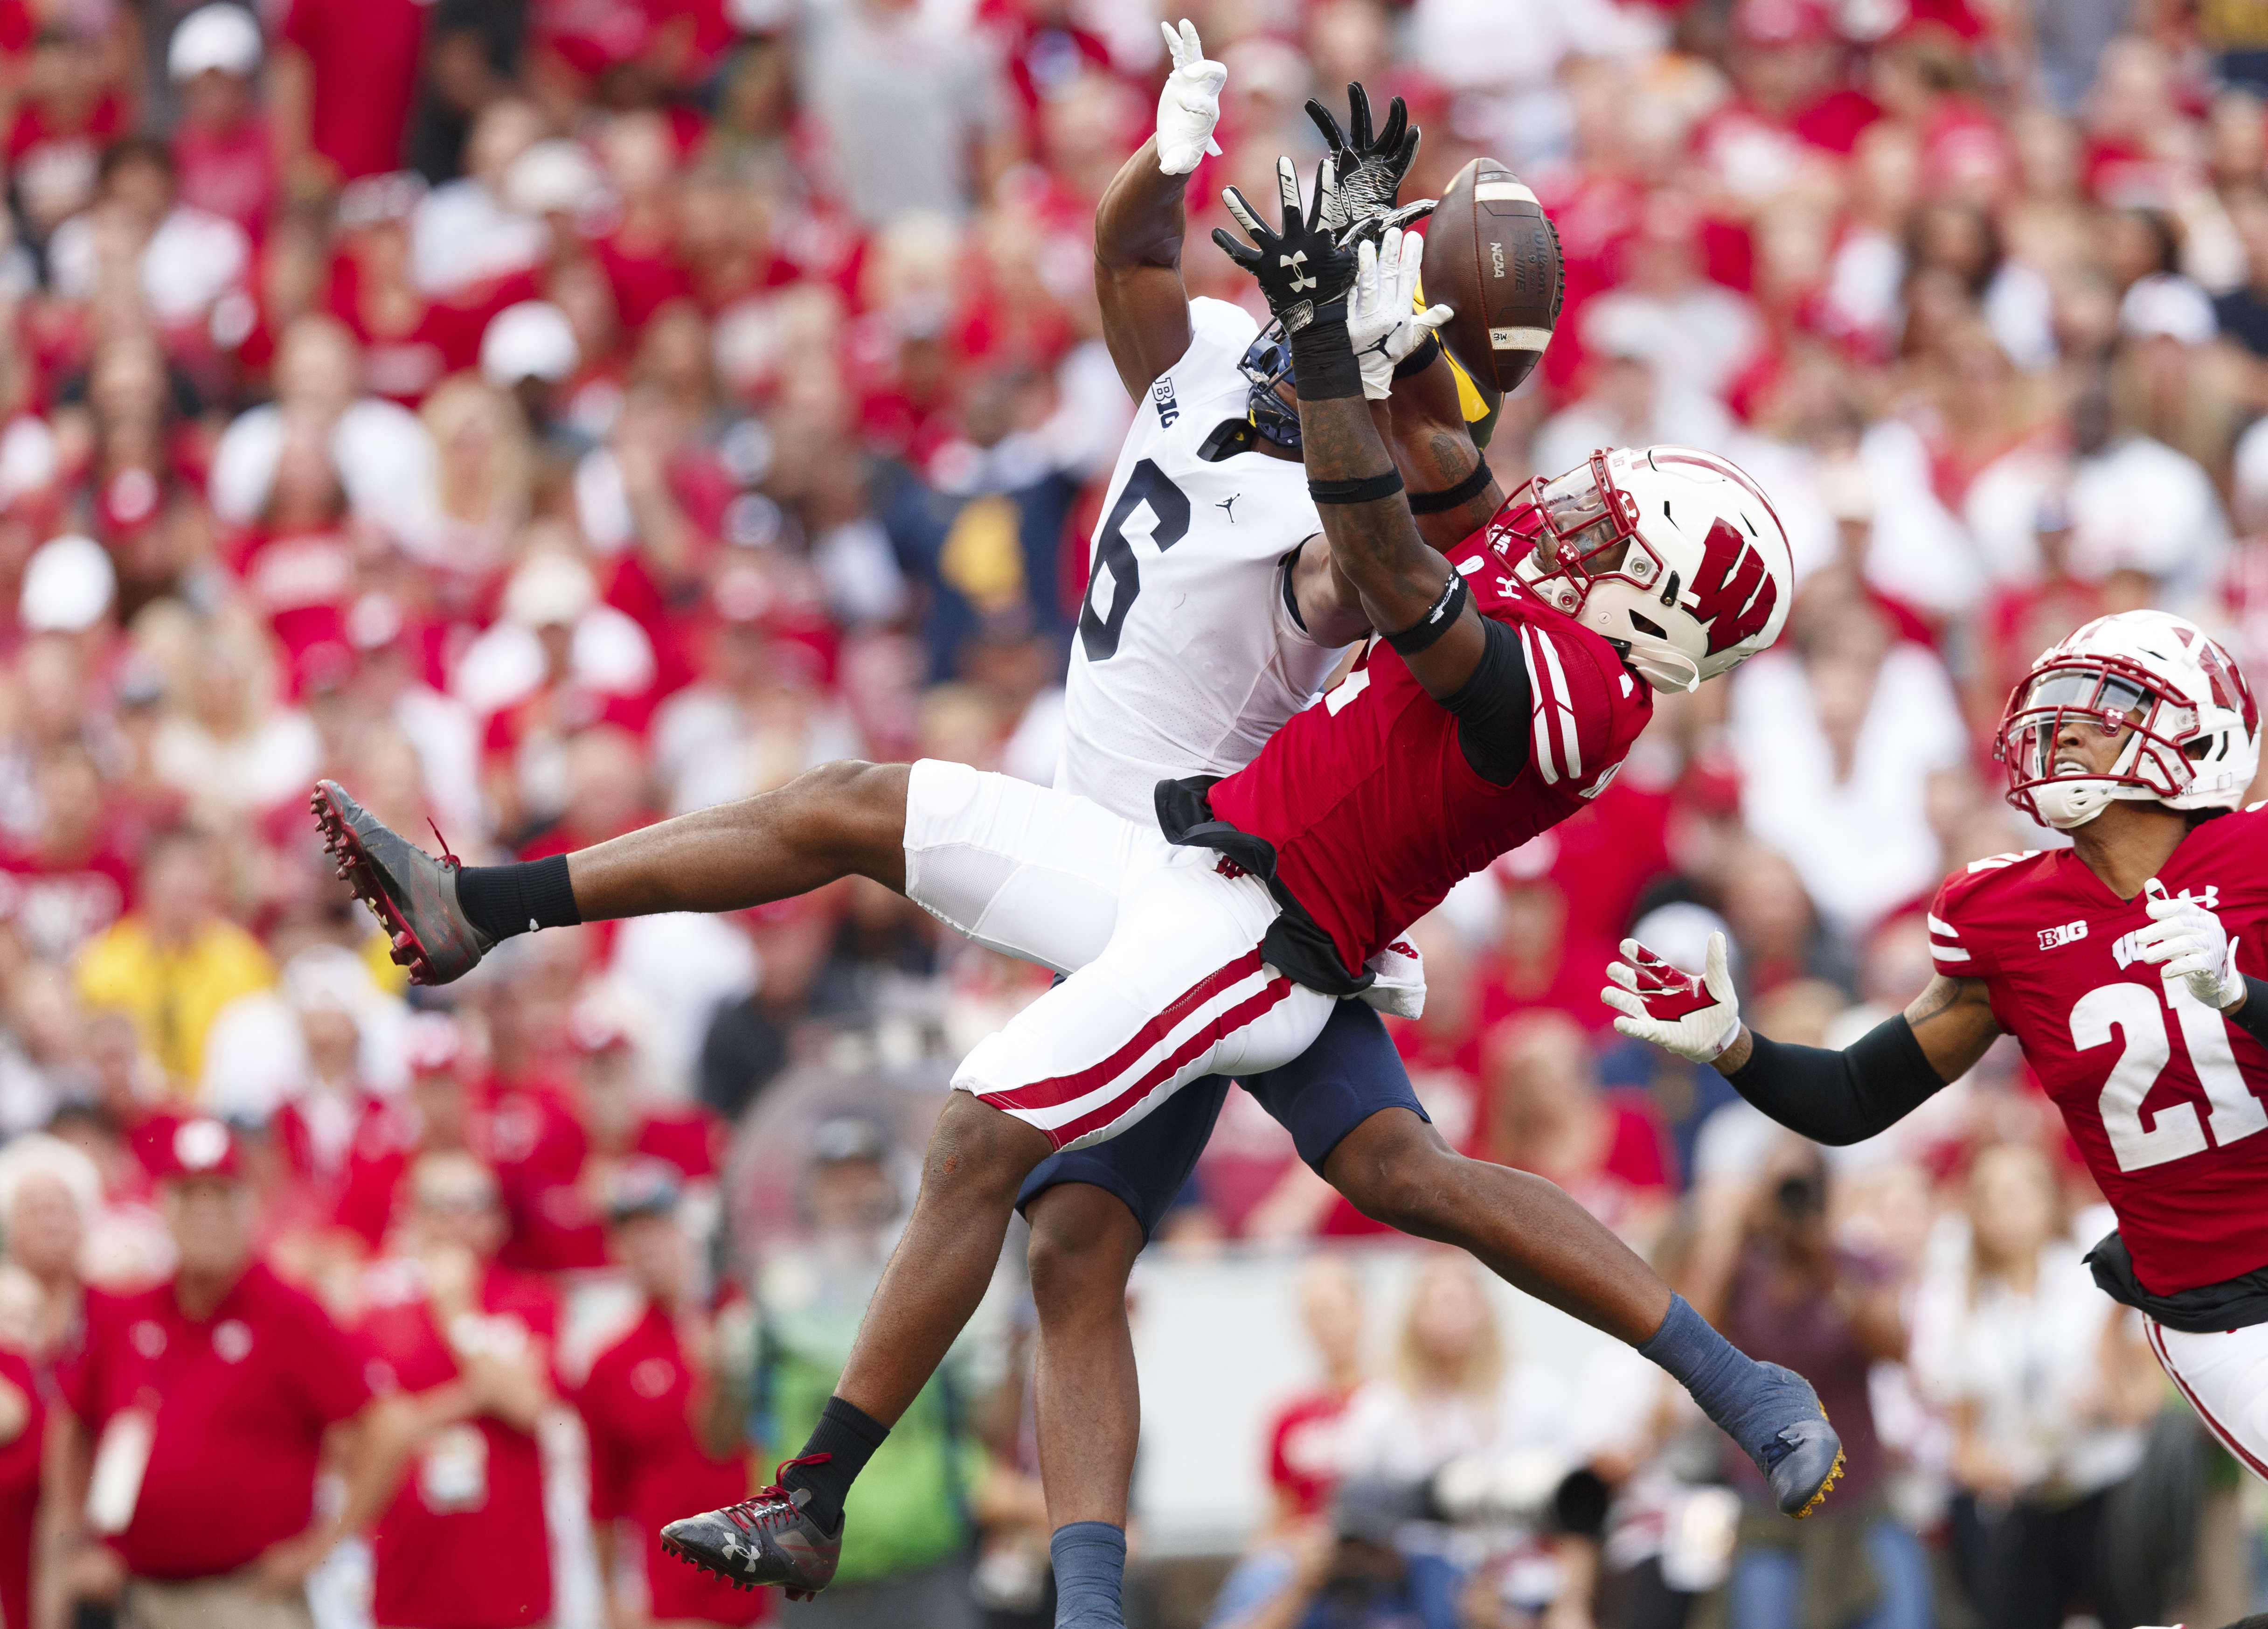 Wisconsin Badgers cornerback Faion Hicks (1) defends the pass intended for Michigan Wolverines wide receiver Cornelius Johnson (6) during the second quarter at Camp Randall Stadium.